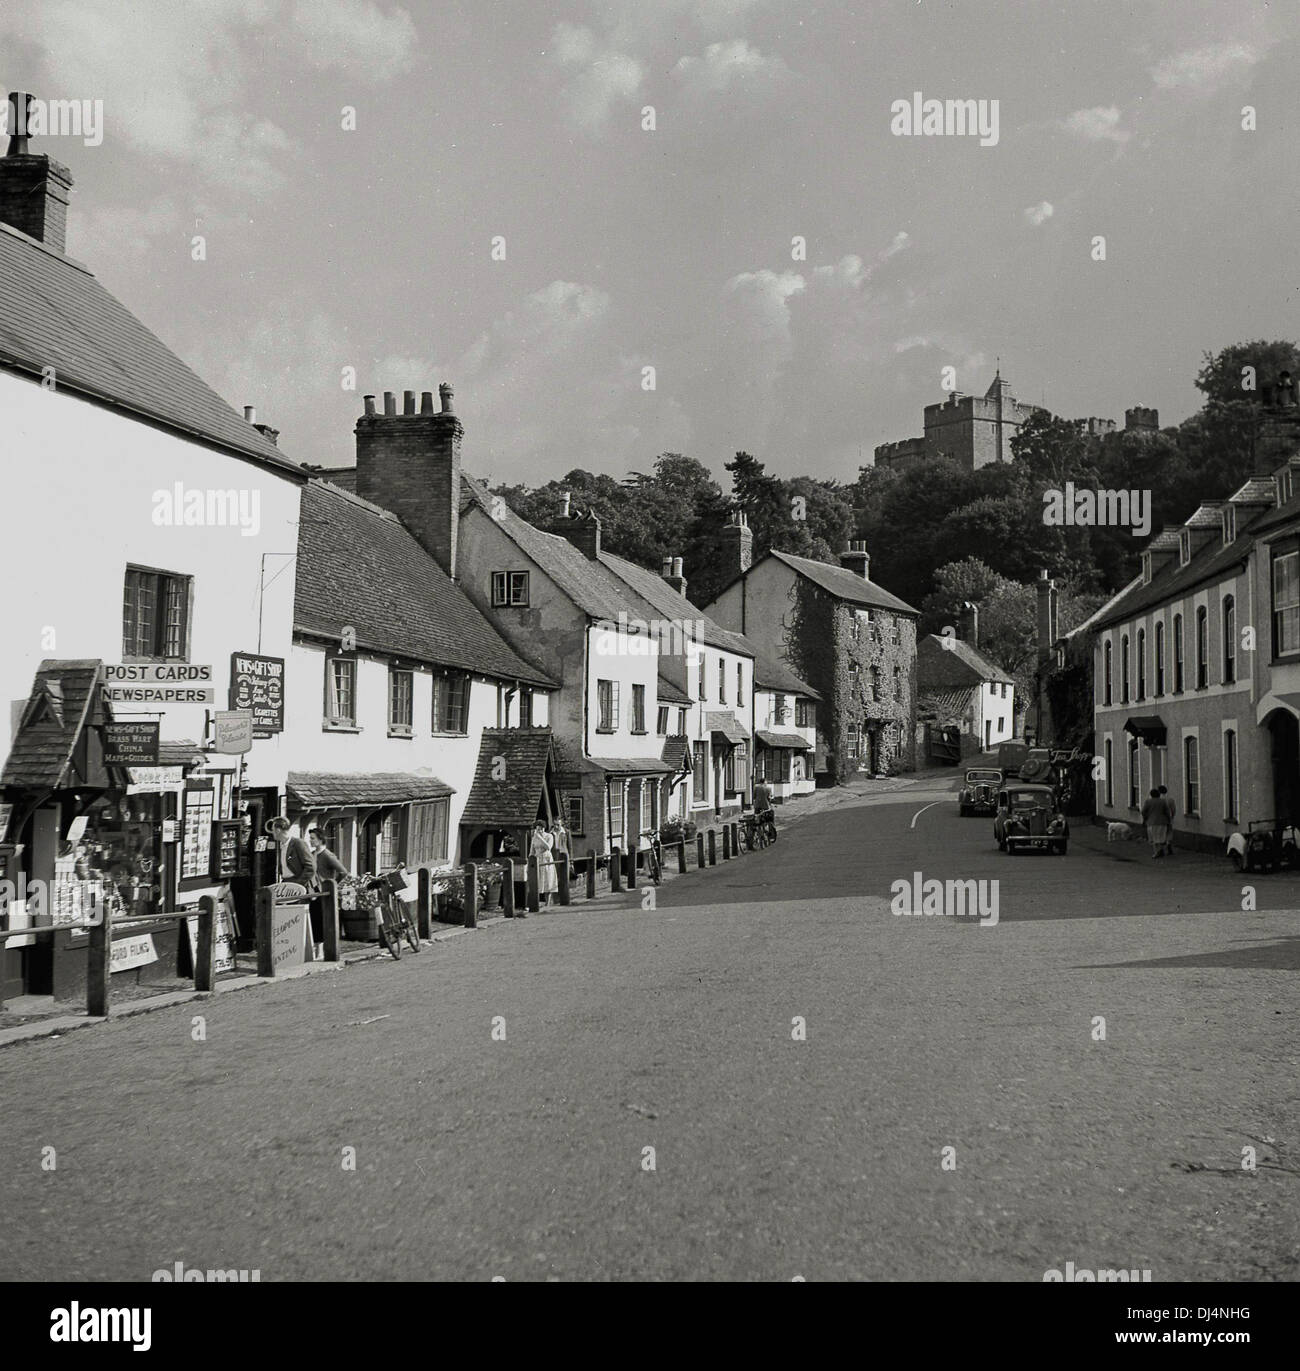 Historical, 1950s, Dunster High Street. Dunster is a old village dating back to medieval times, with ancient castle - seen in the background - priory, dovecote, yarn market, inns and tearooms in Somerset, England. Stock Photo